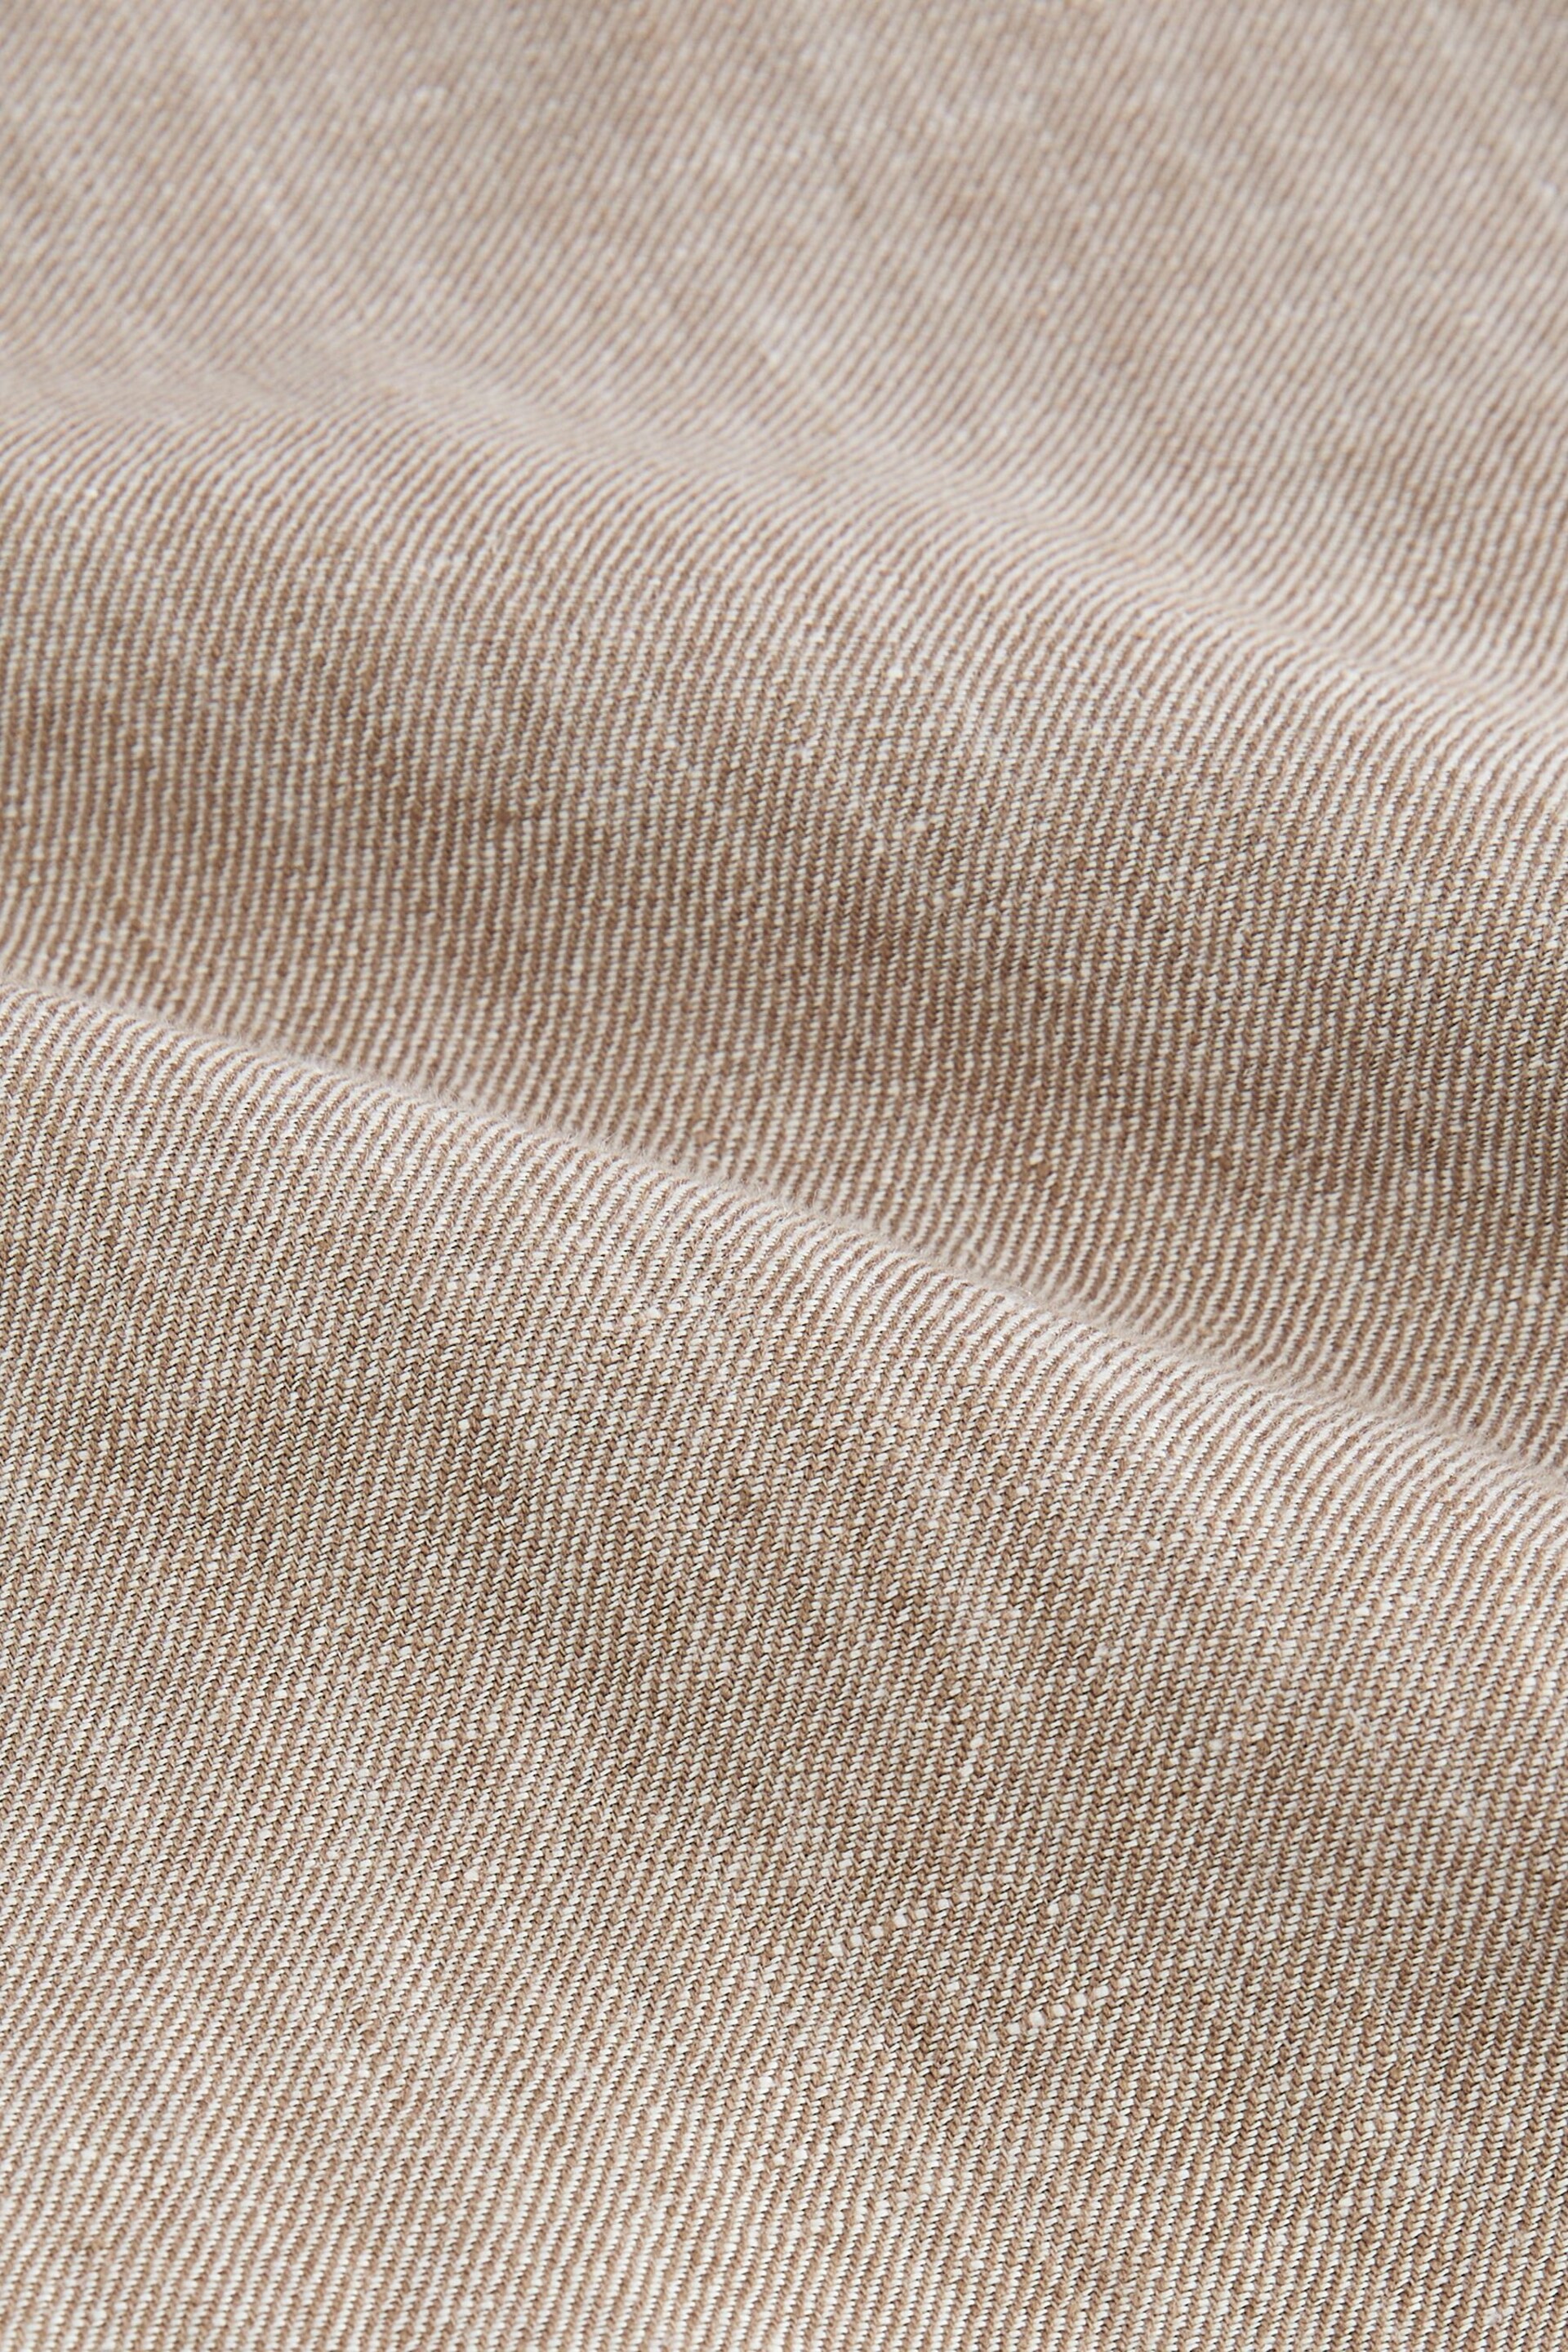 Sand Linen Luxe Shorts - Image 8 of 9